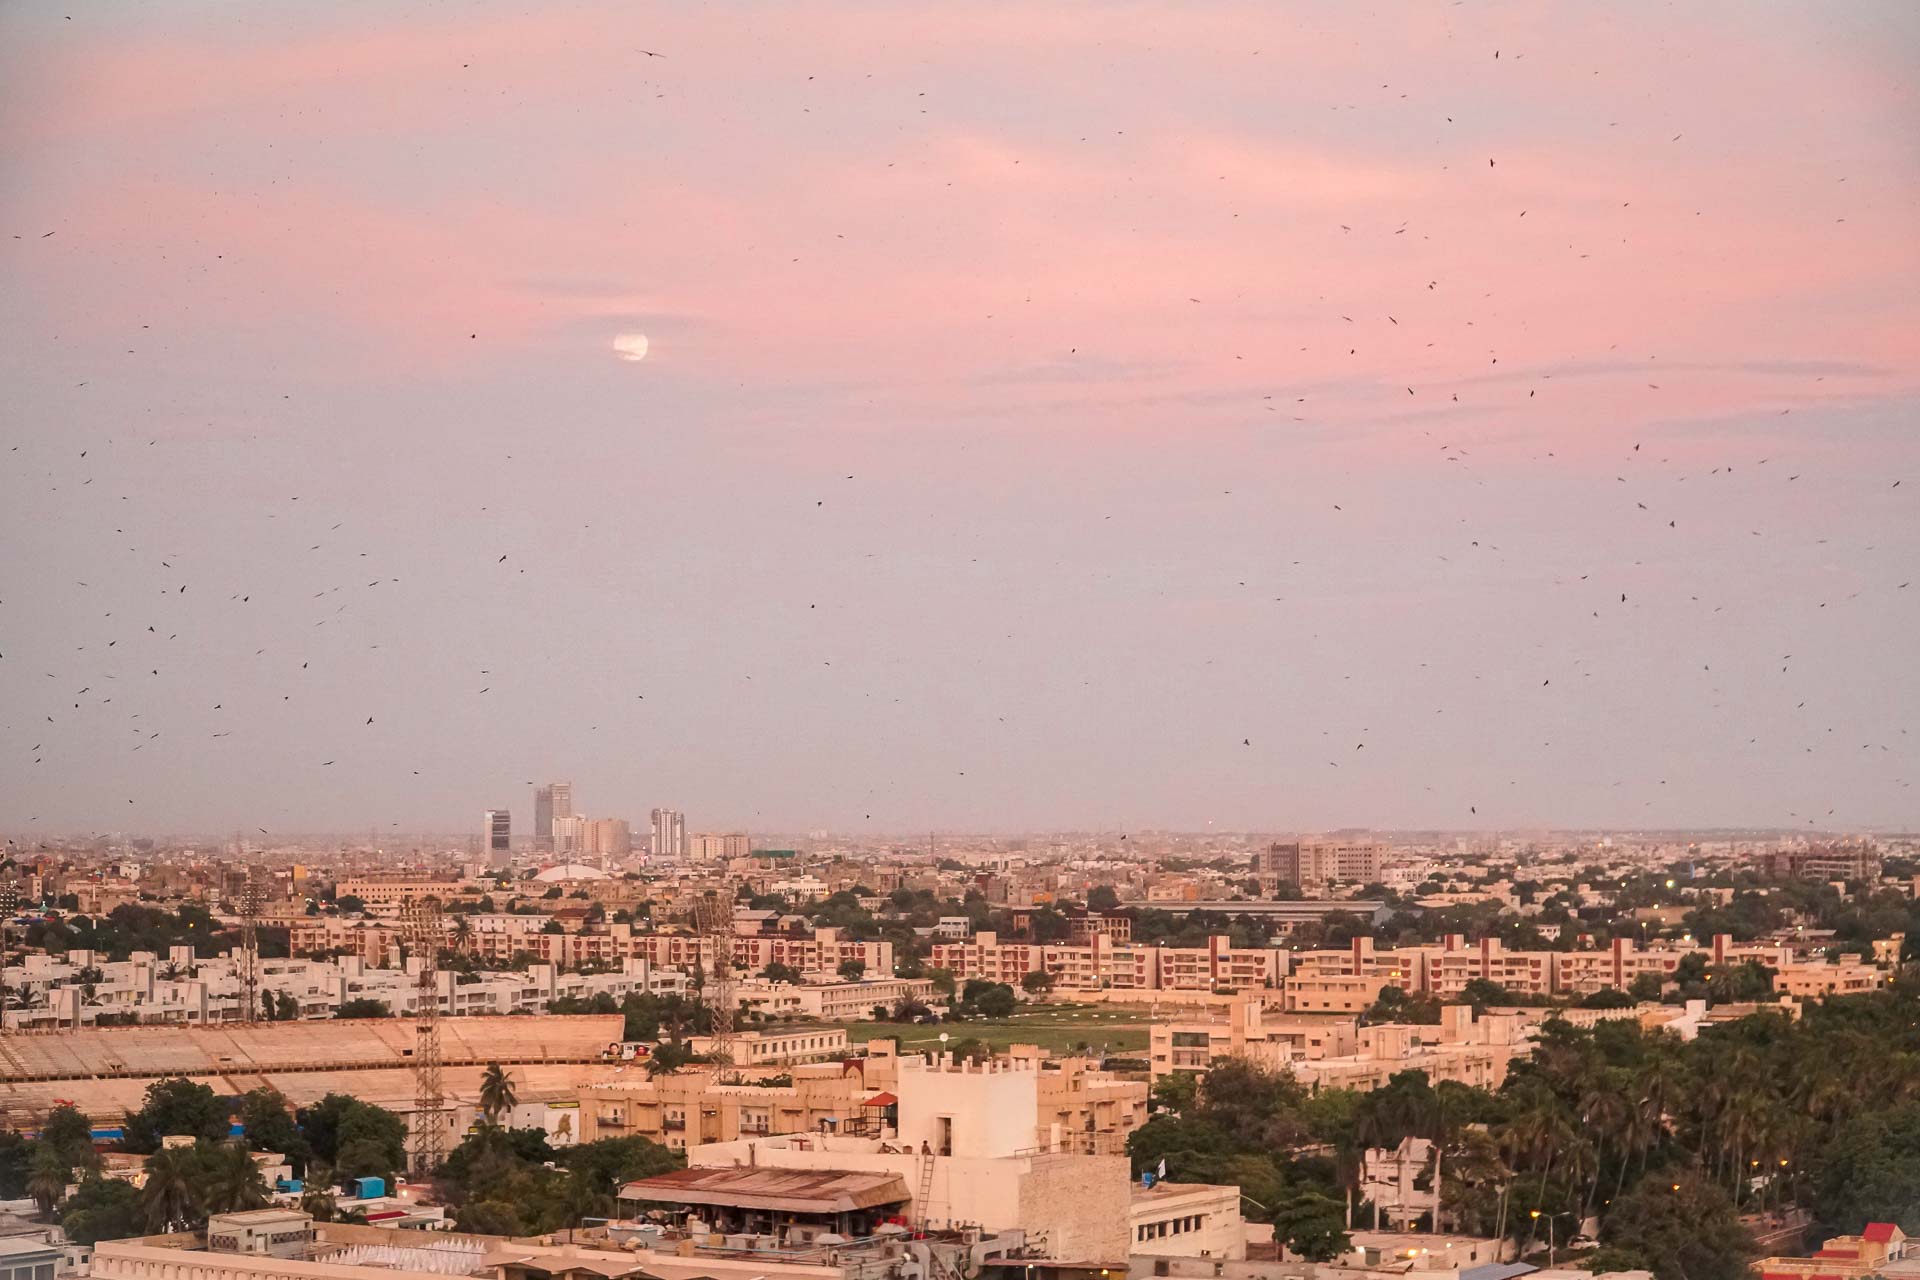 a pink sky with the sun and the city of Karachi in Pakistan